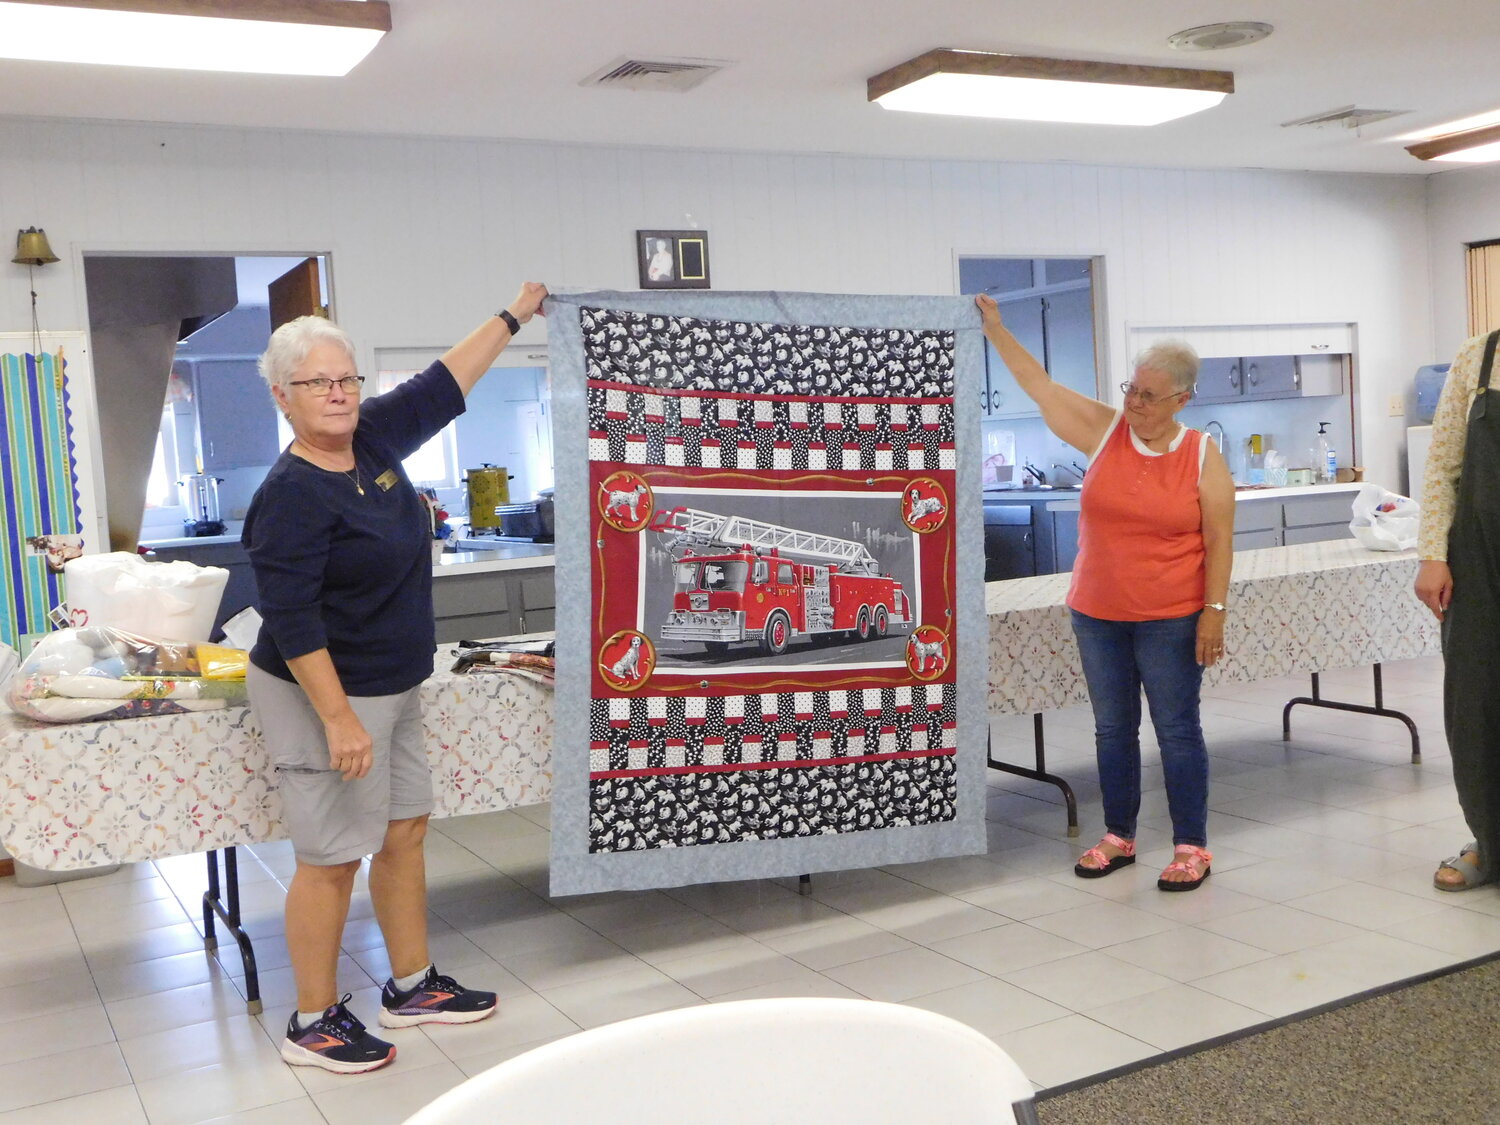 These themed quilts will be donated for distribution to young people who can benefit from having a comforting quilt of their very own.